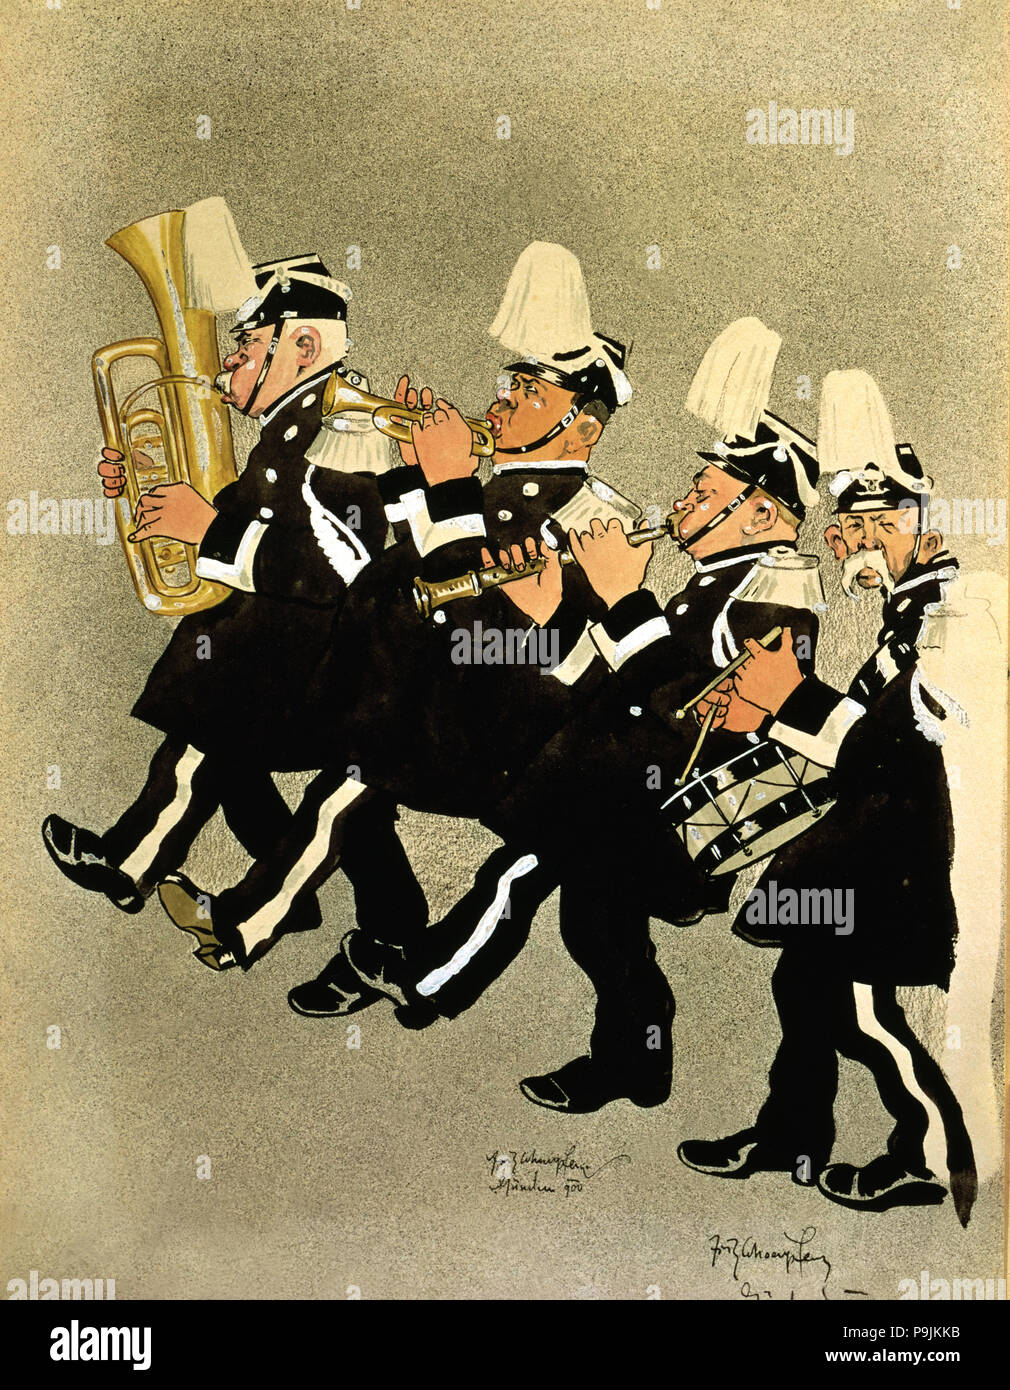 Military band, caricature, 1900. Stock Photo